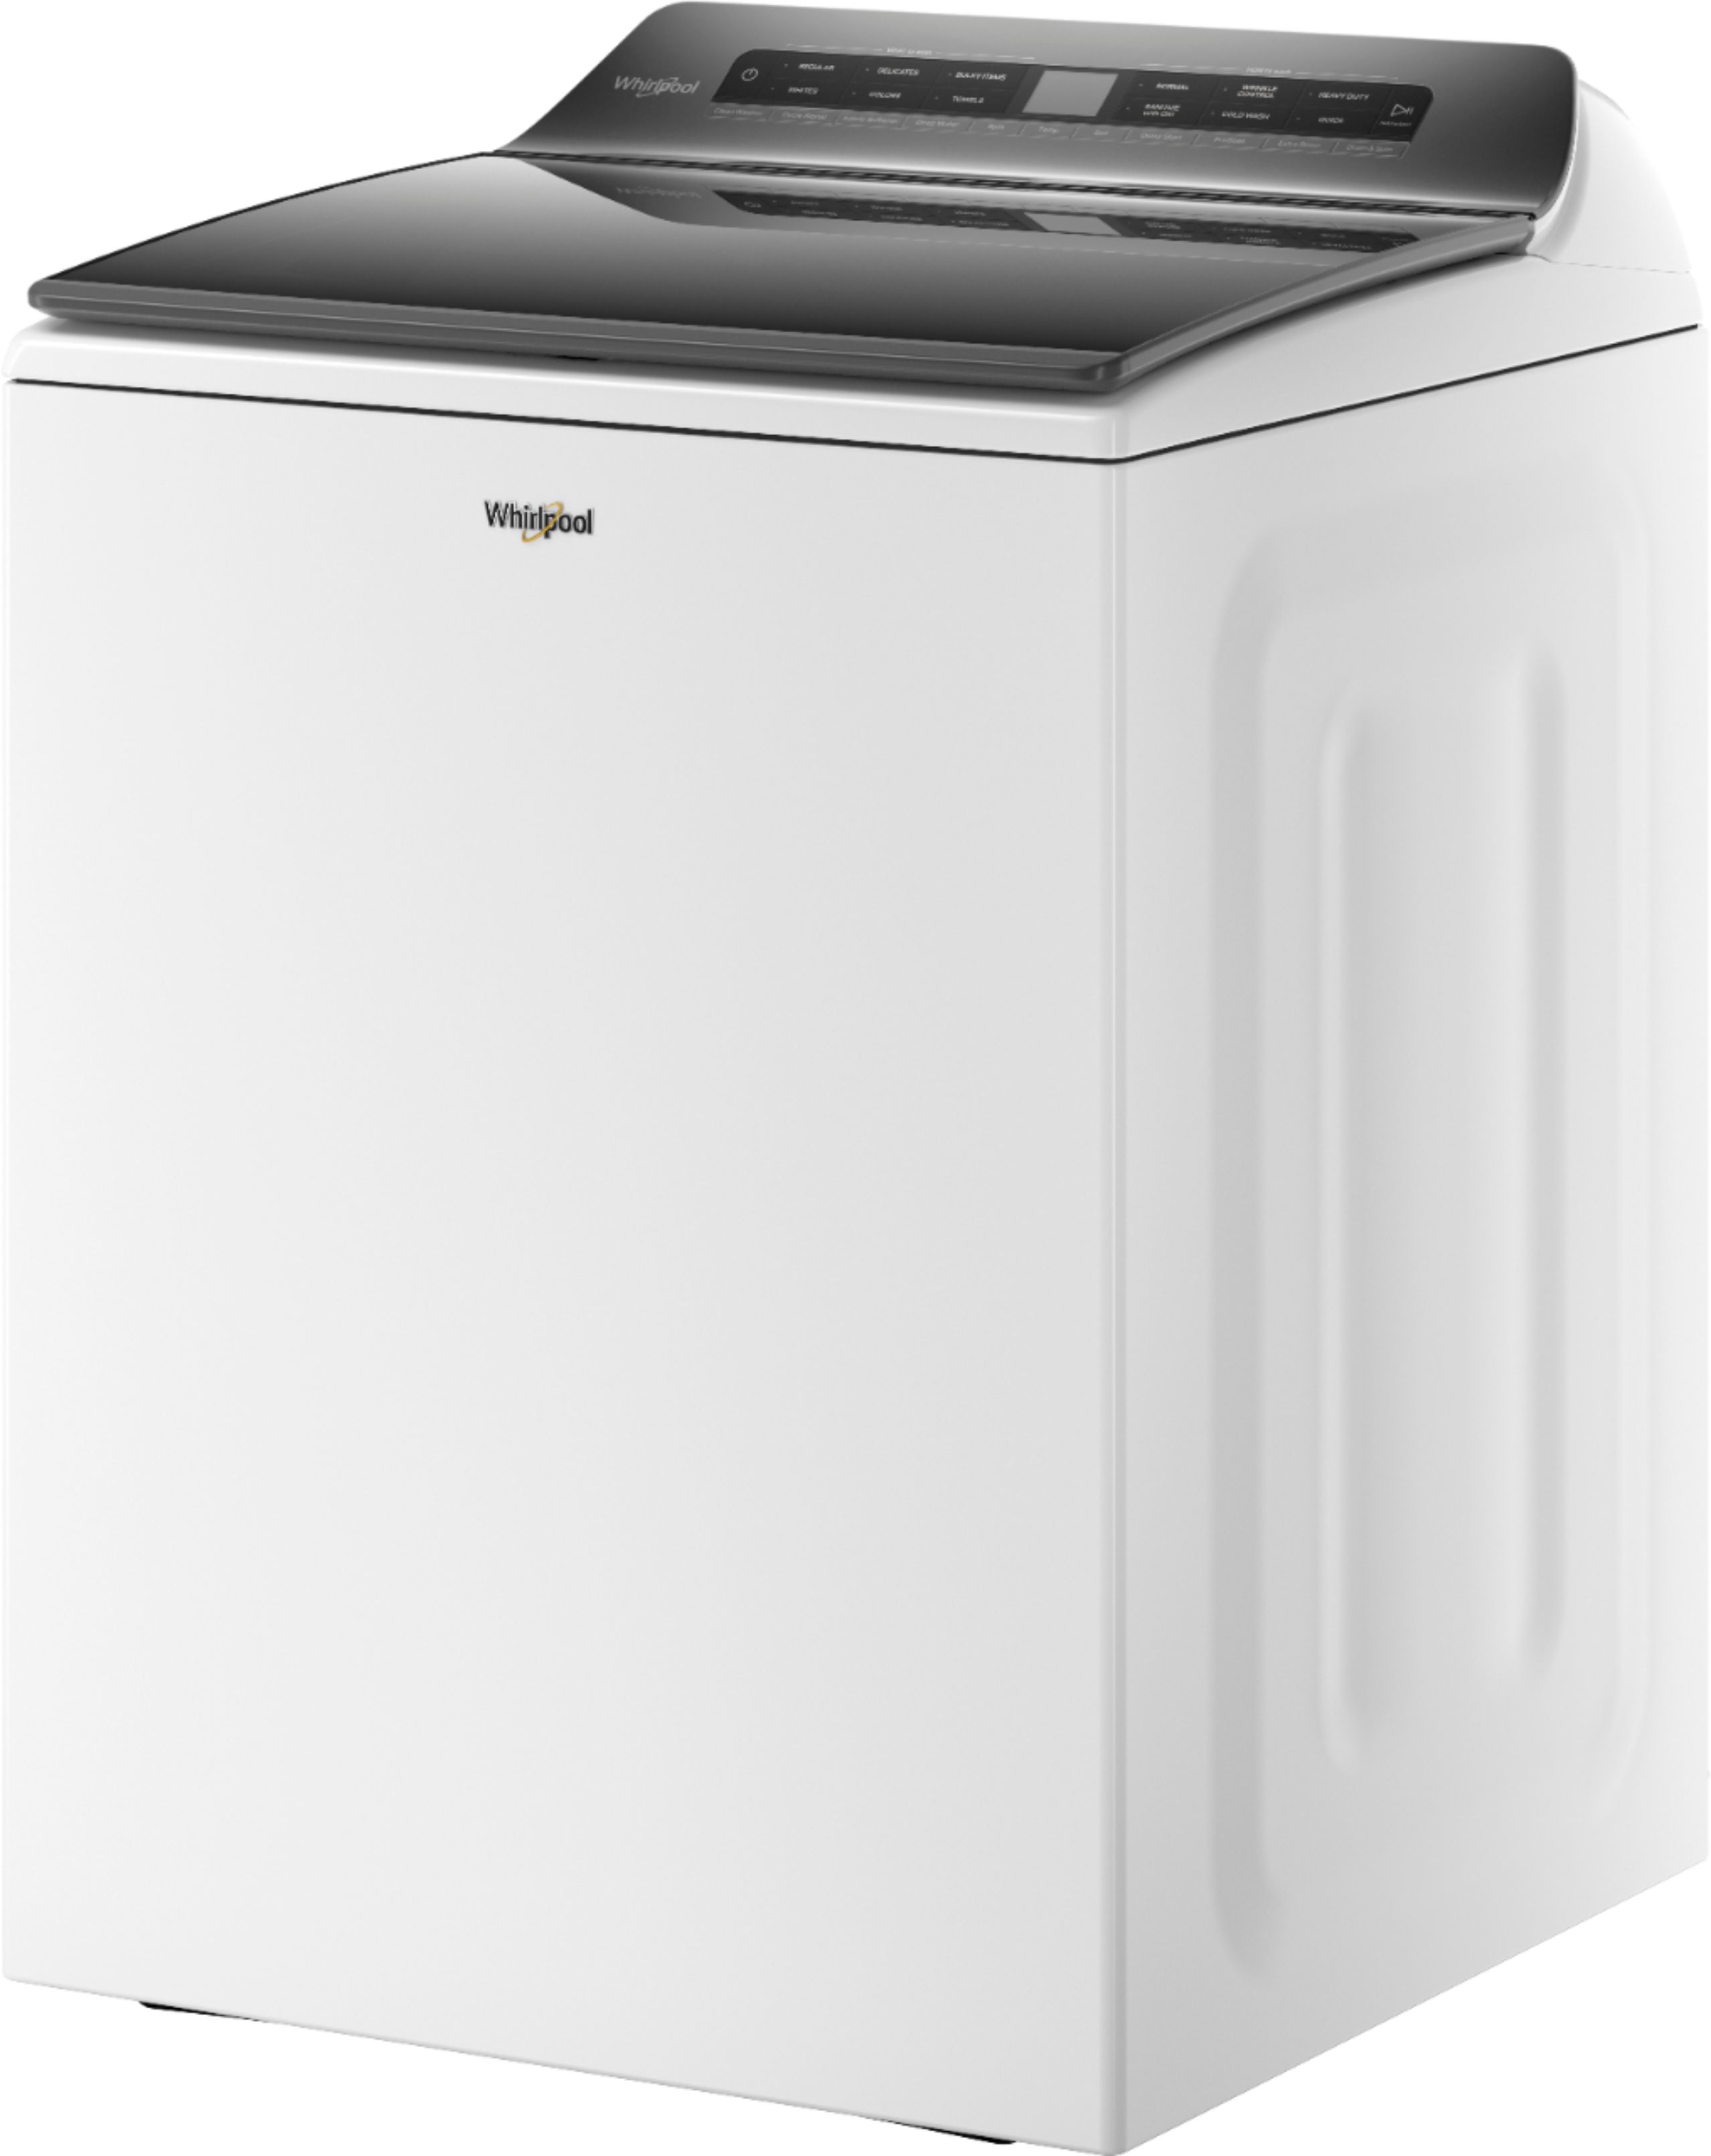 Left View: Samsung - 5.5 cu. ft. Extra-Large Capacity Smart Top Load Washer with Auto Dispense System - Brushed black